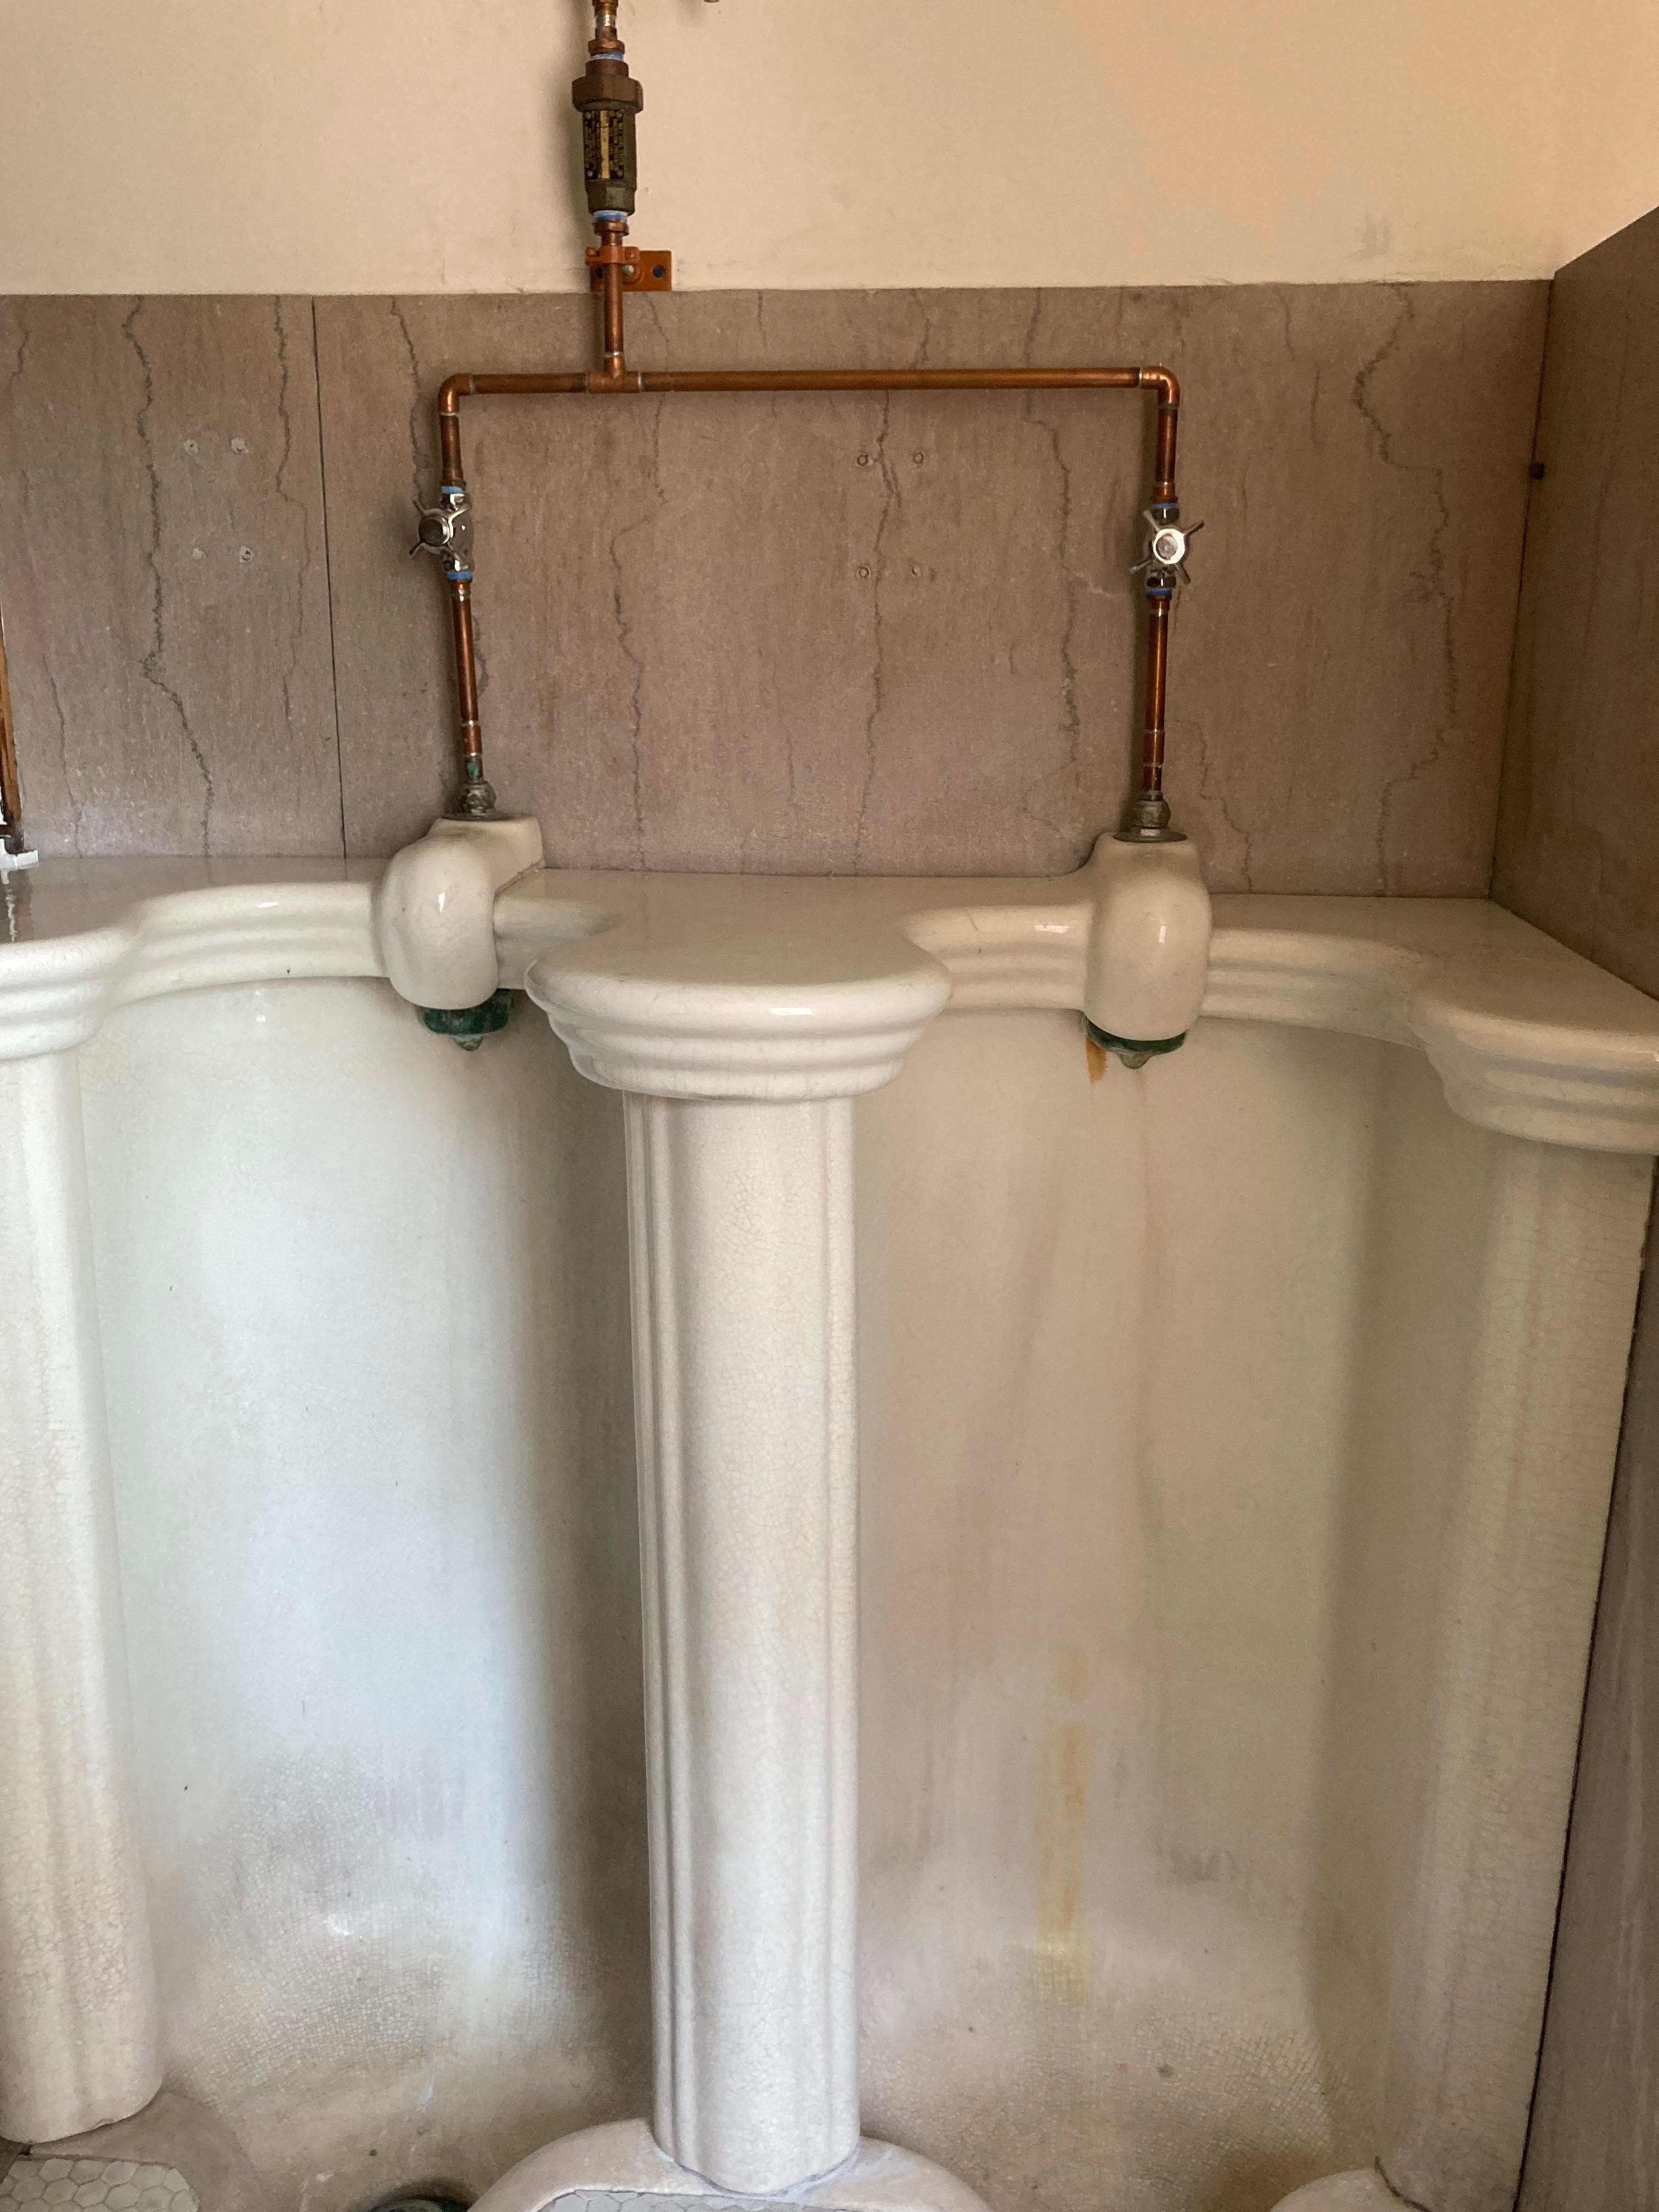 Historic urinal restored to working condition